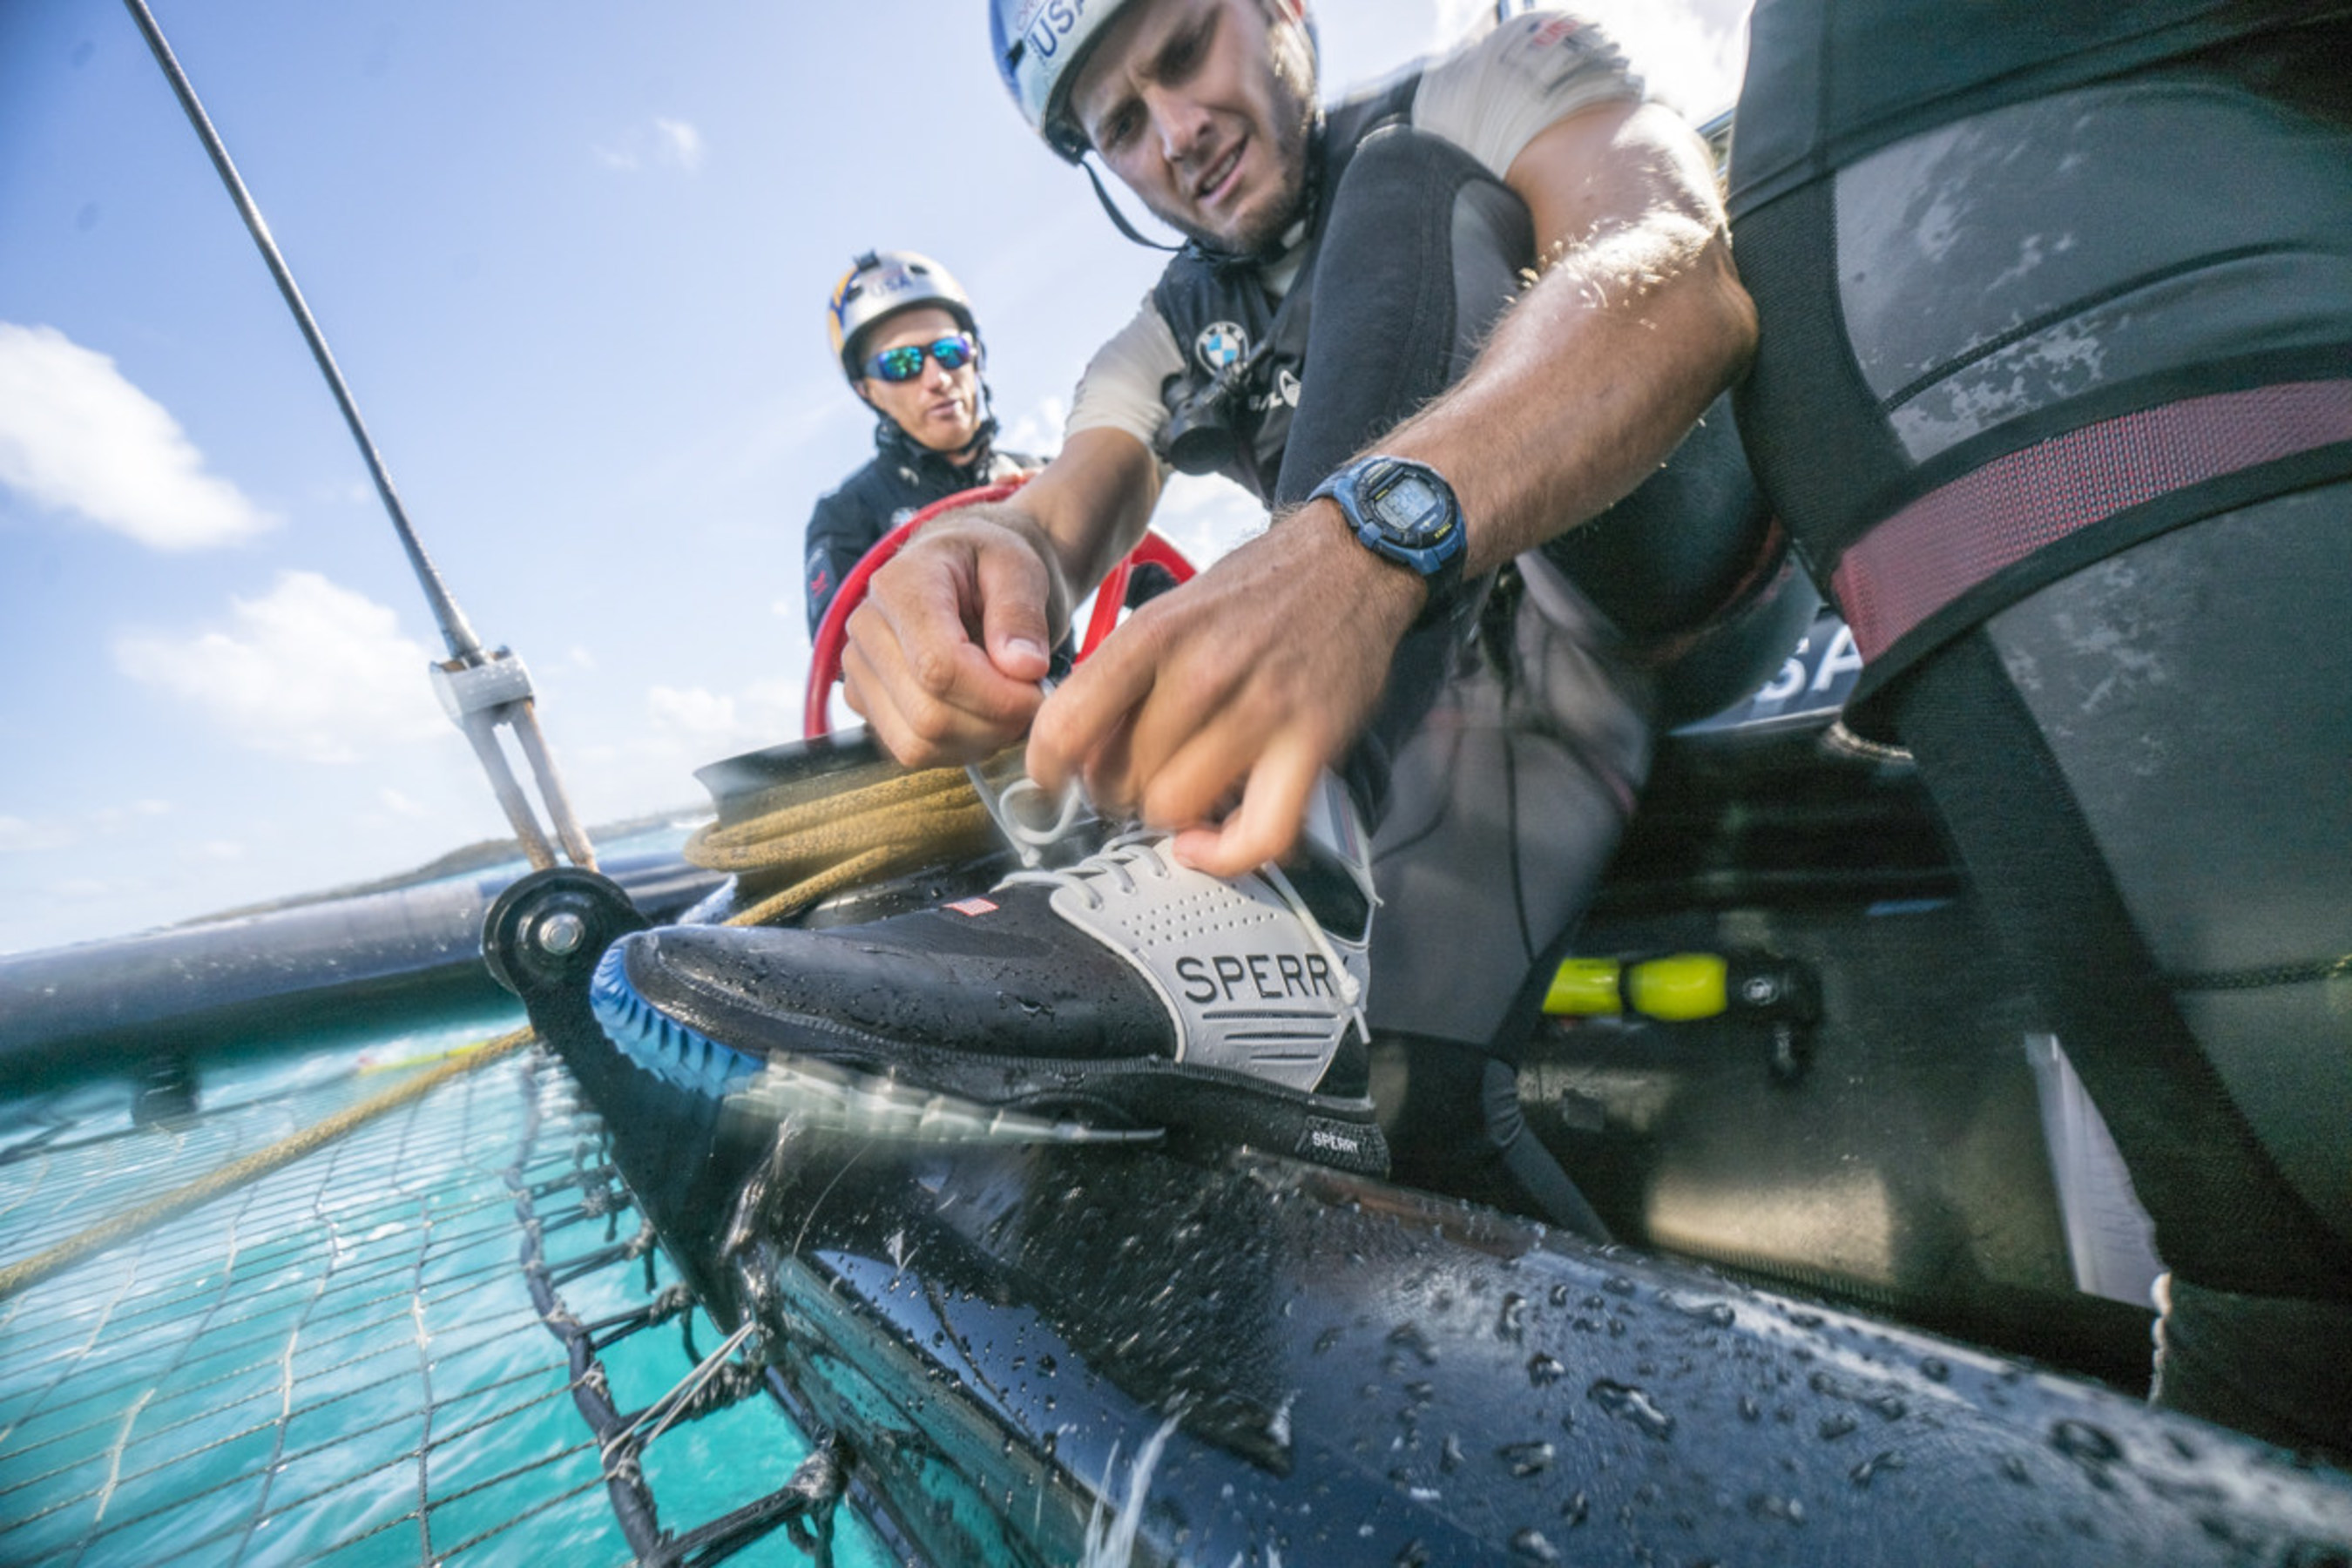 ORACLE TEAM USA athlete TJ Johnson laces up the new Sperry 7 SEAS Pro shoe before racing Photo Credit: Sam Greenfield